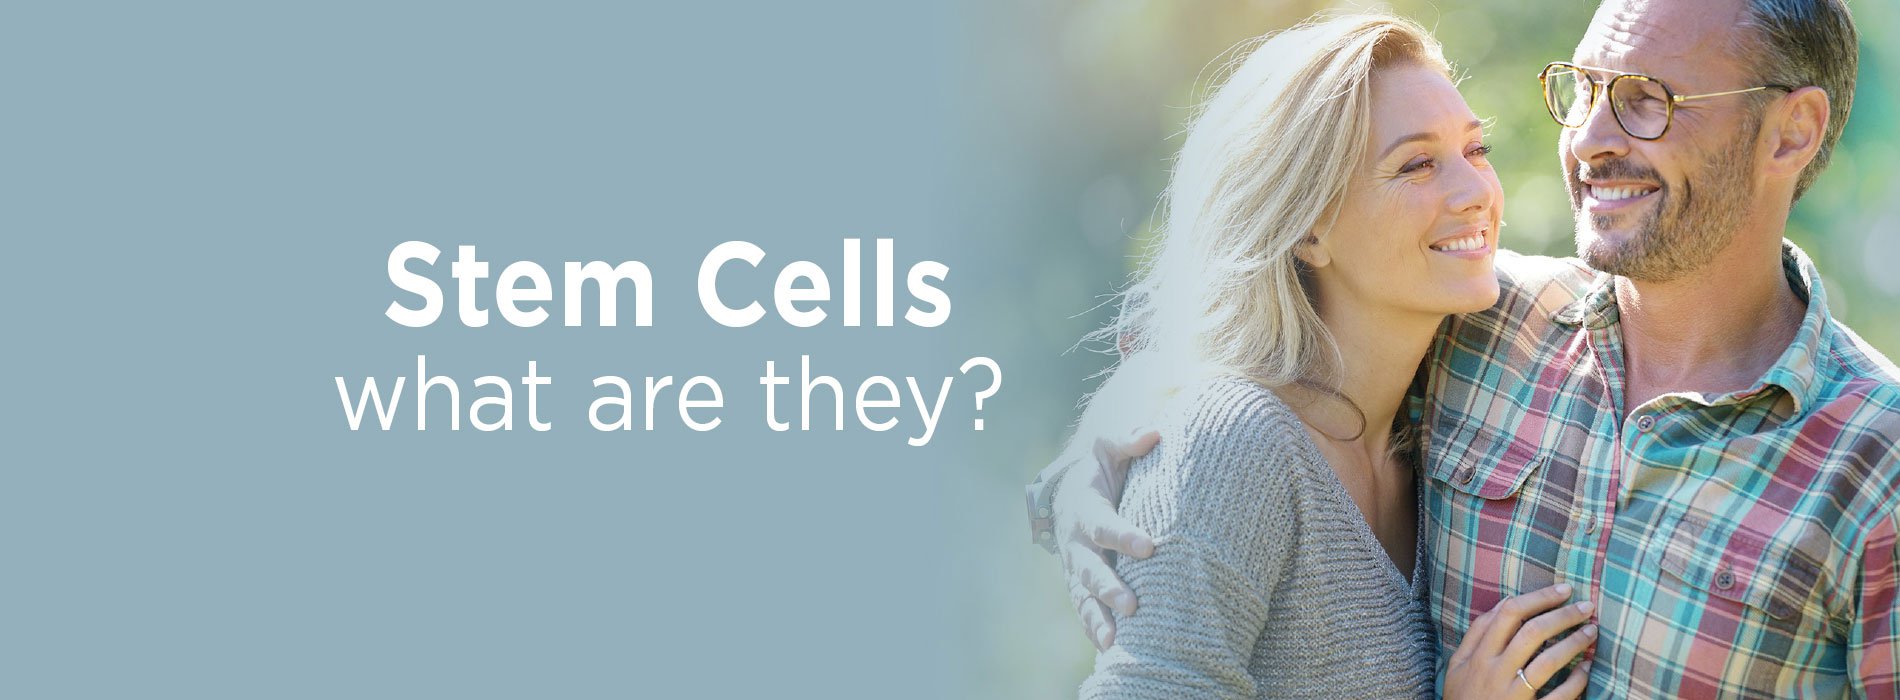 New Image International:What are Stem Cells?